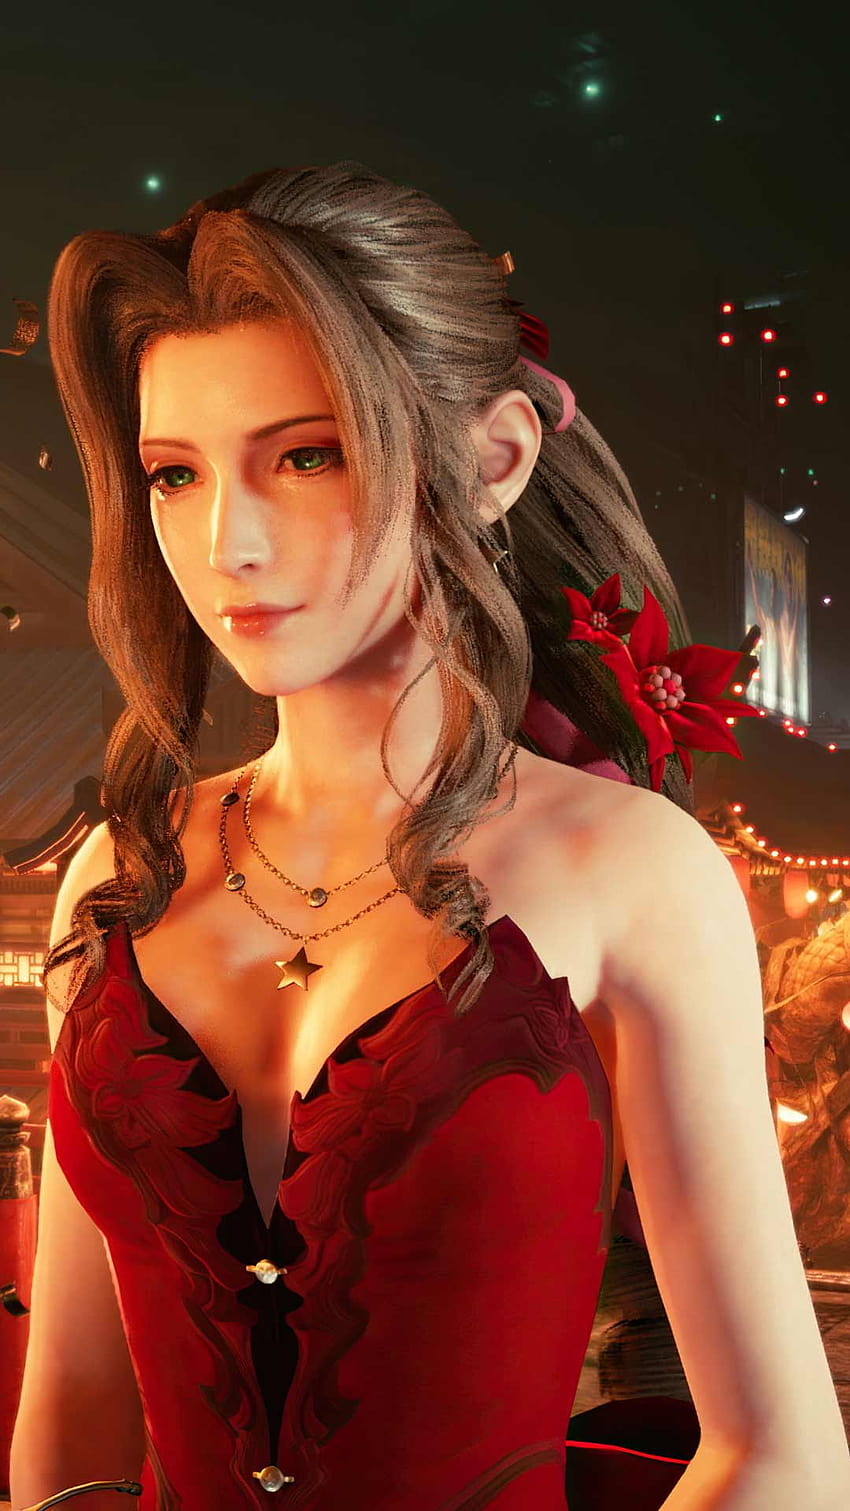 Final Fantasy 7 Remake phone backgrounds PS4 게임 아트 포스터 로고 on iPhone android in 2020, ff7 remake android HD 전화 배경 화면